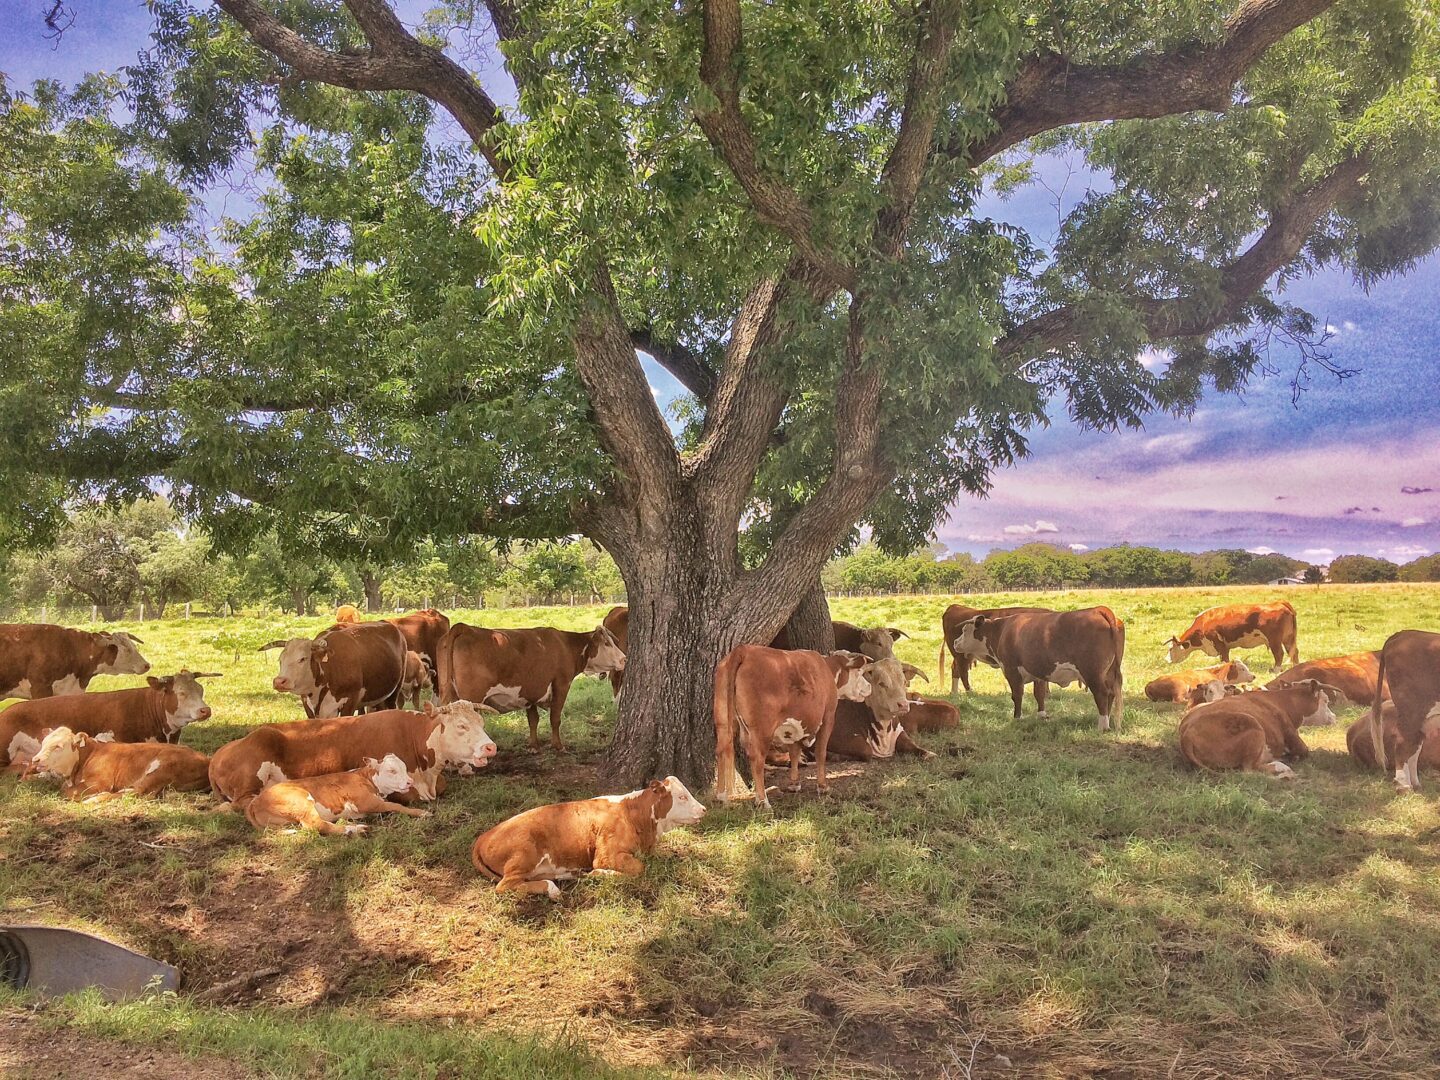 A group of cows laying under a tree.